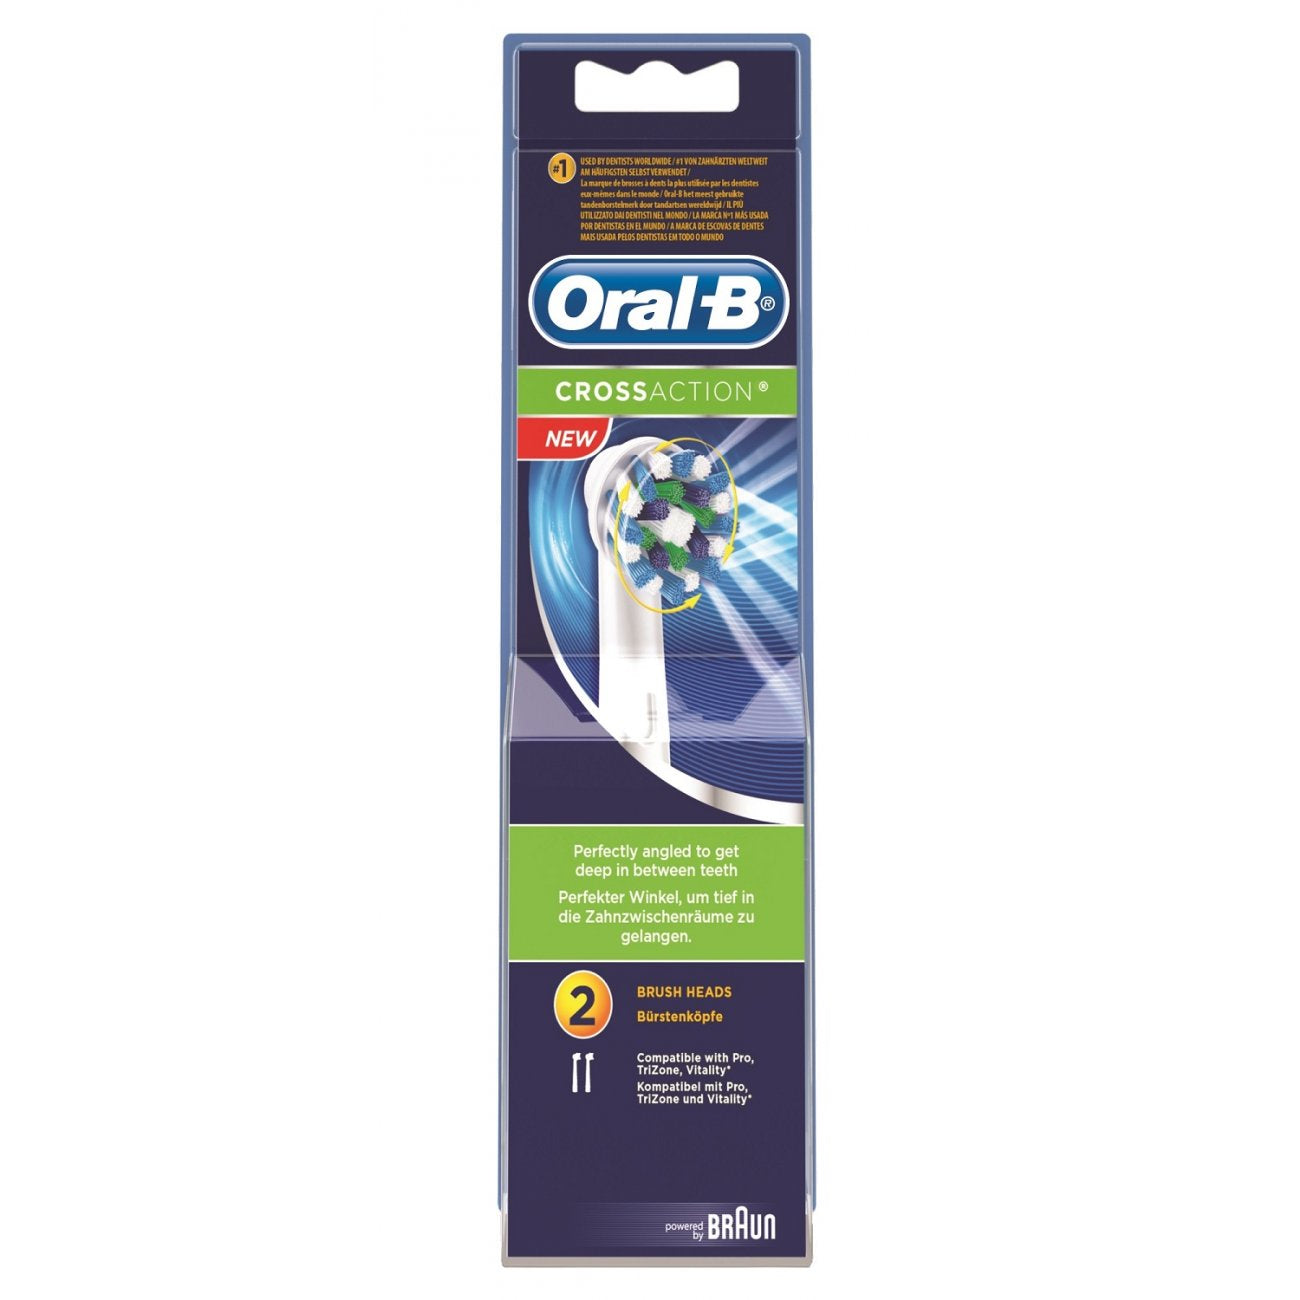 CrossAction Replacement Head Electric Toothbrush x2